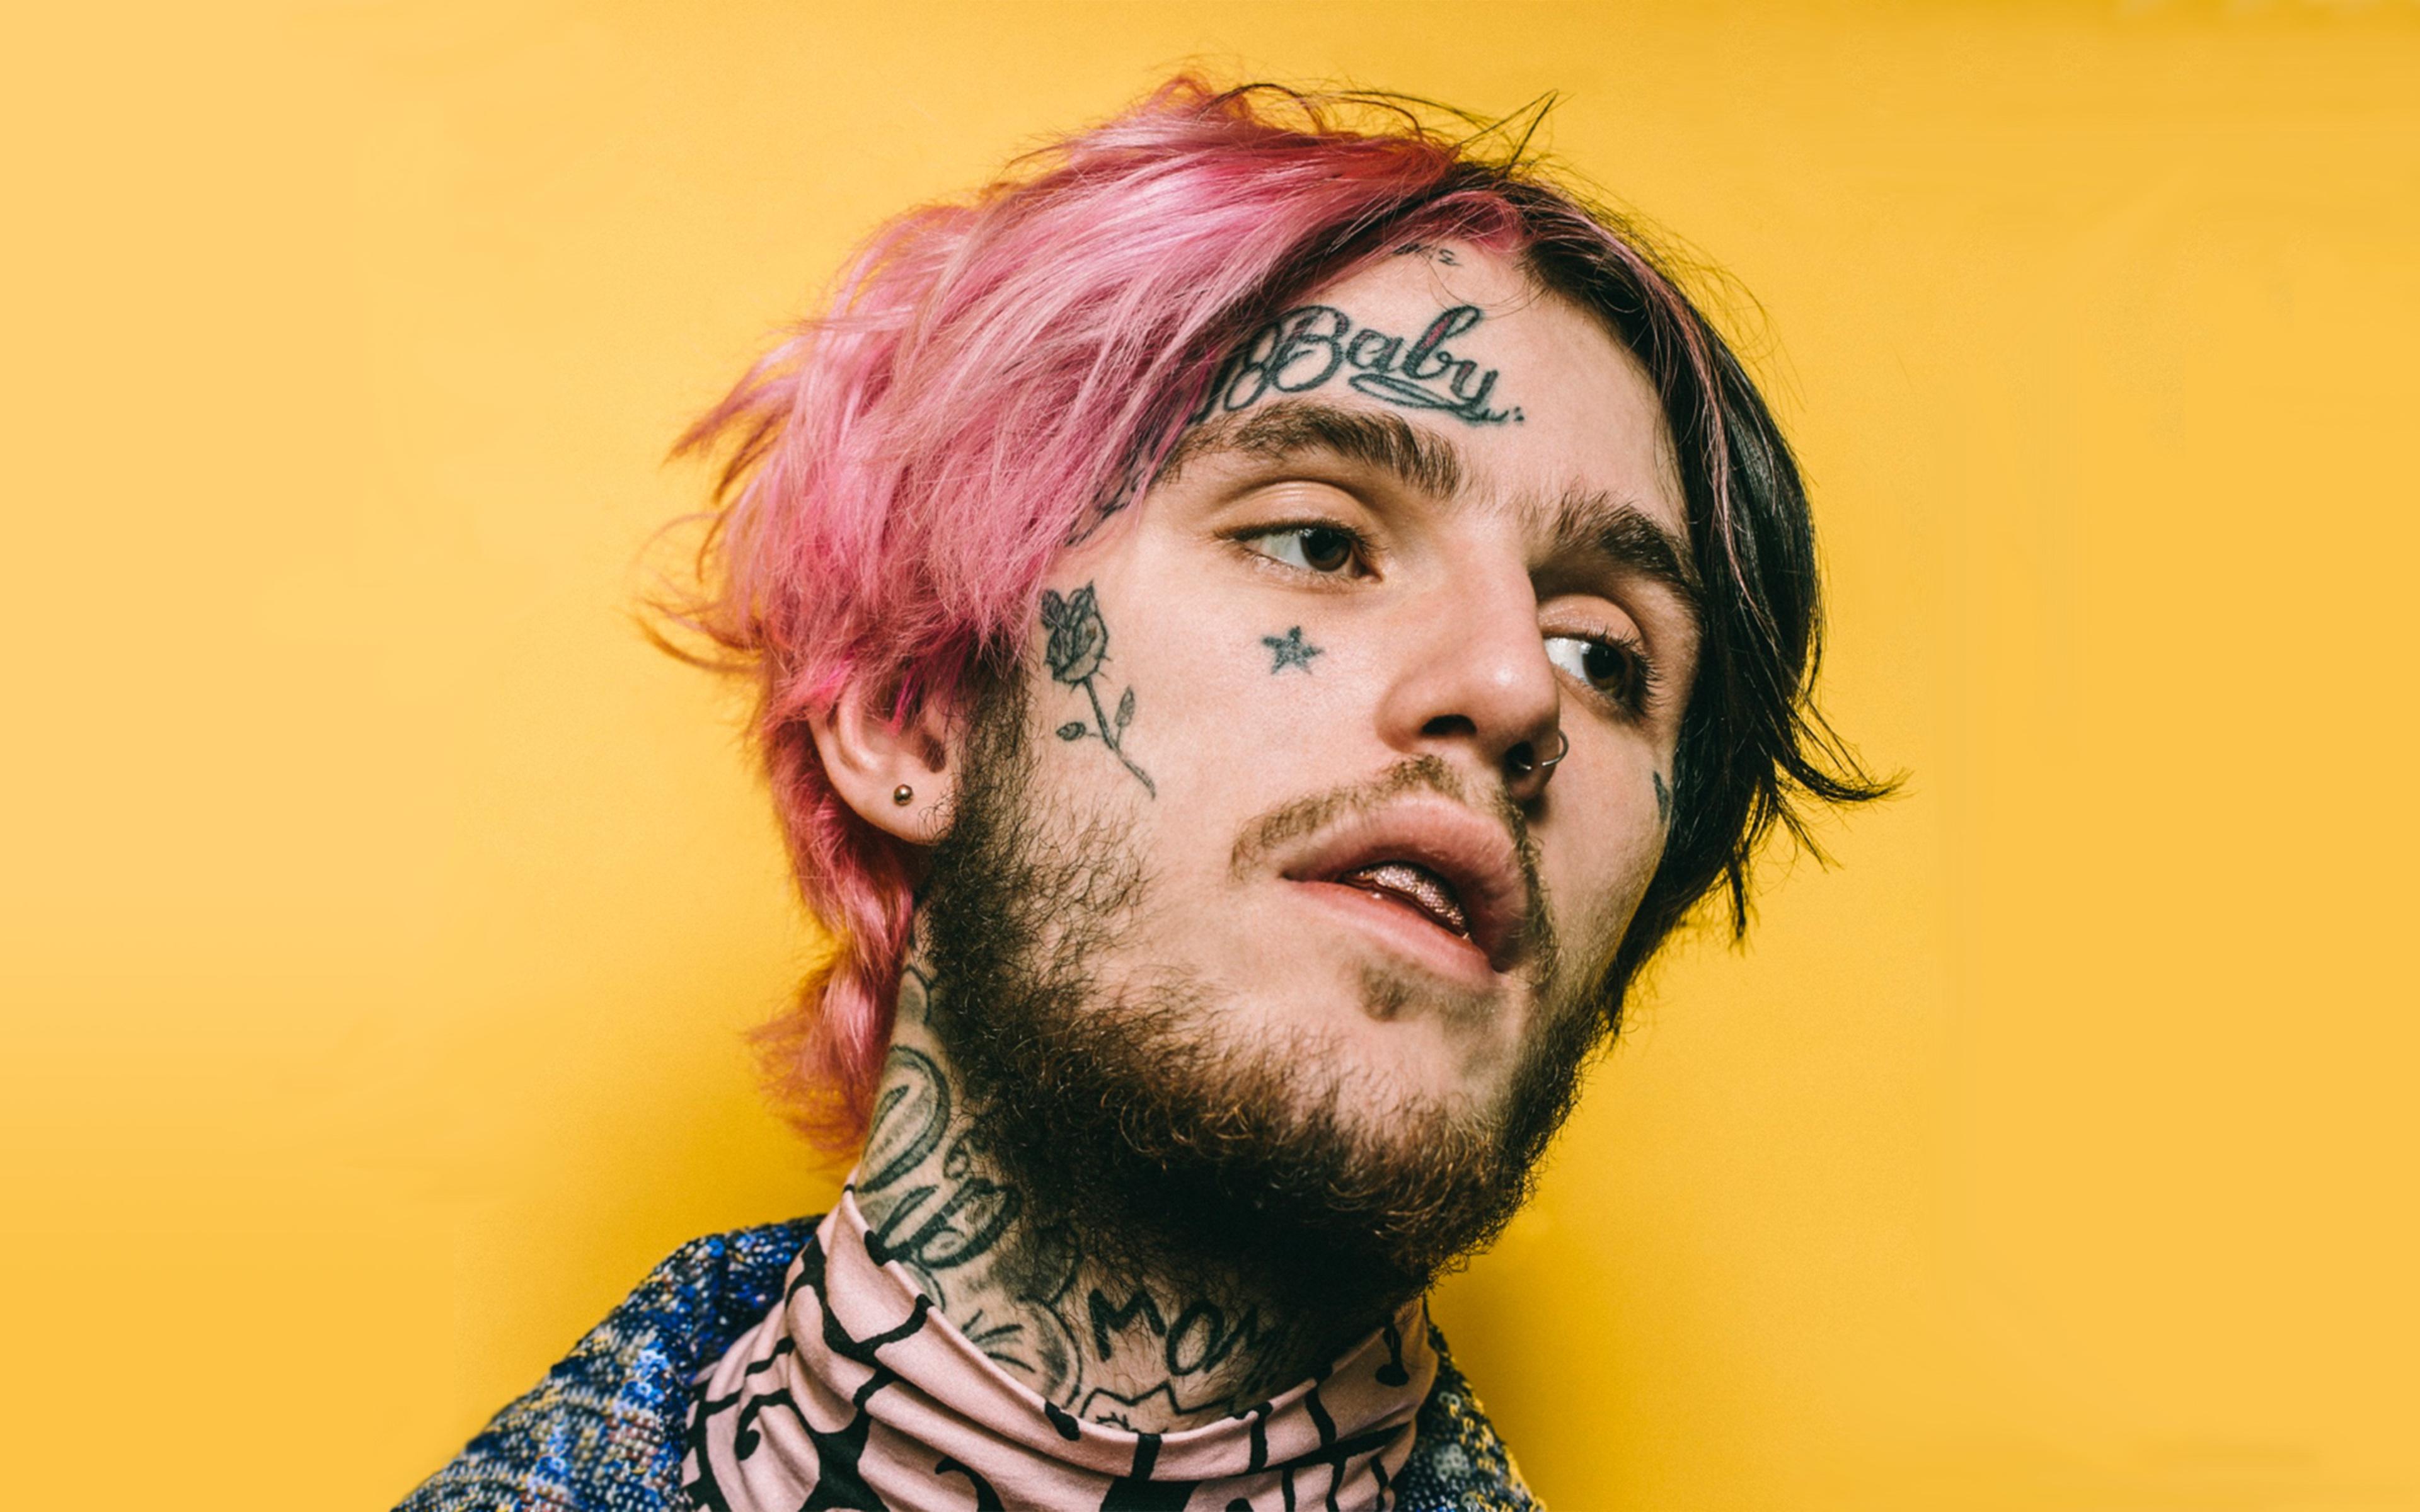 3840 x 2400 · jpeg - 3840x2400 Lil Peep 4k HD 4k Wallpapers, Images, Backgrounds, Photos and ...